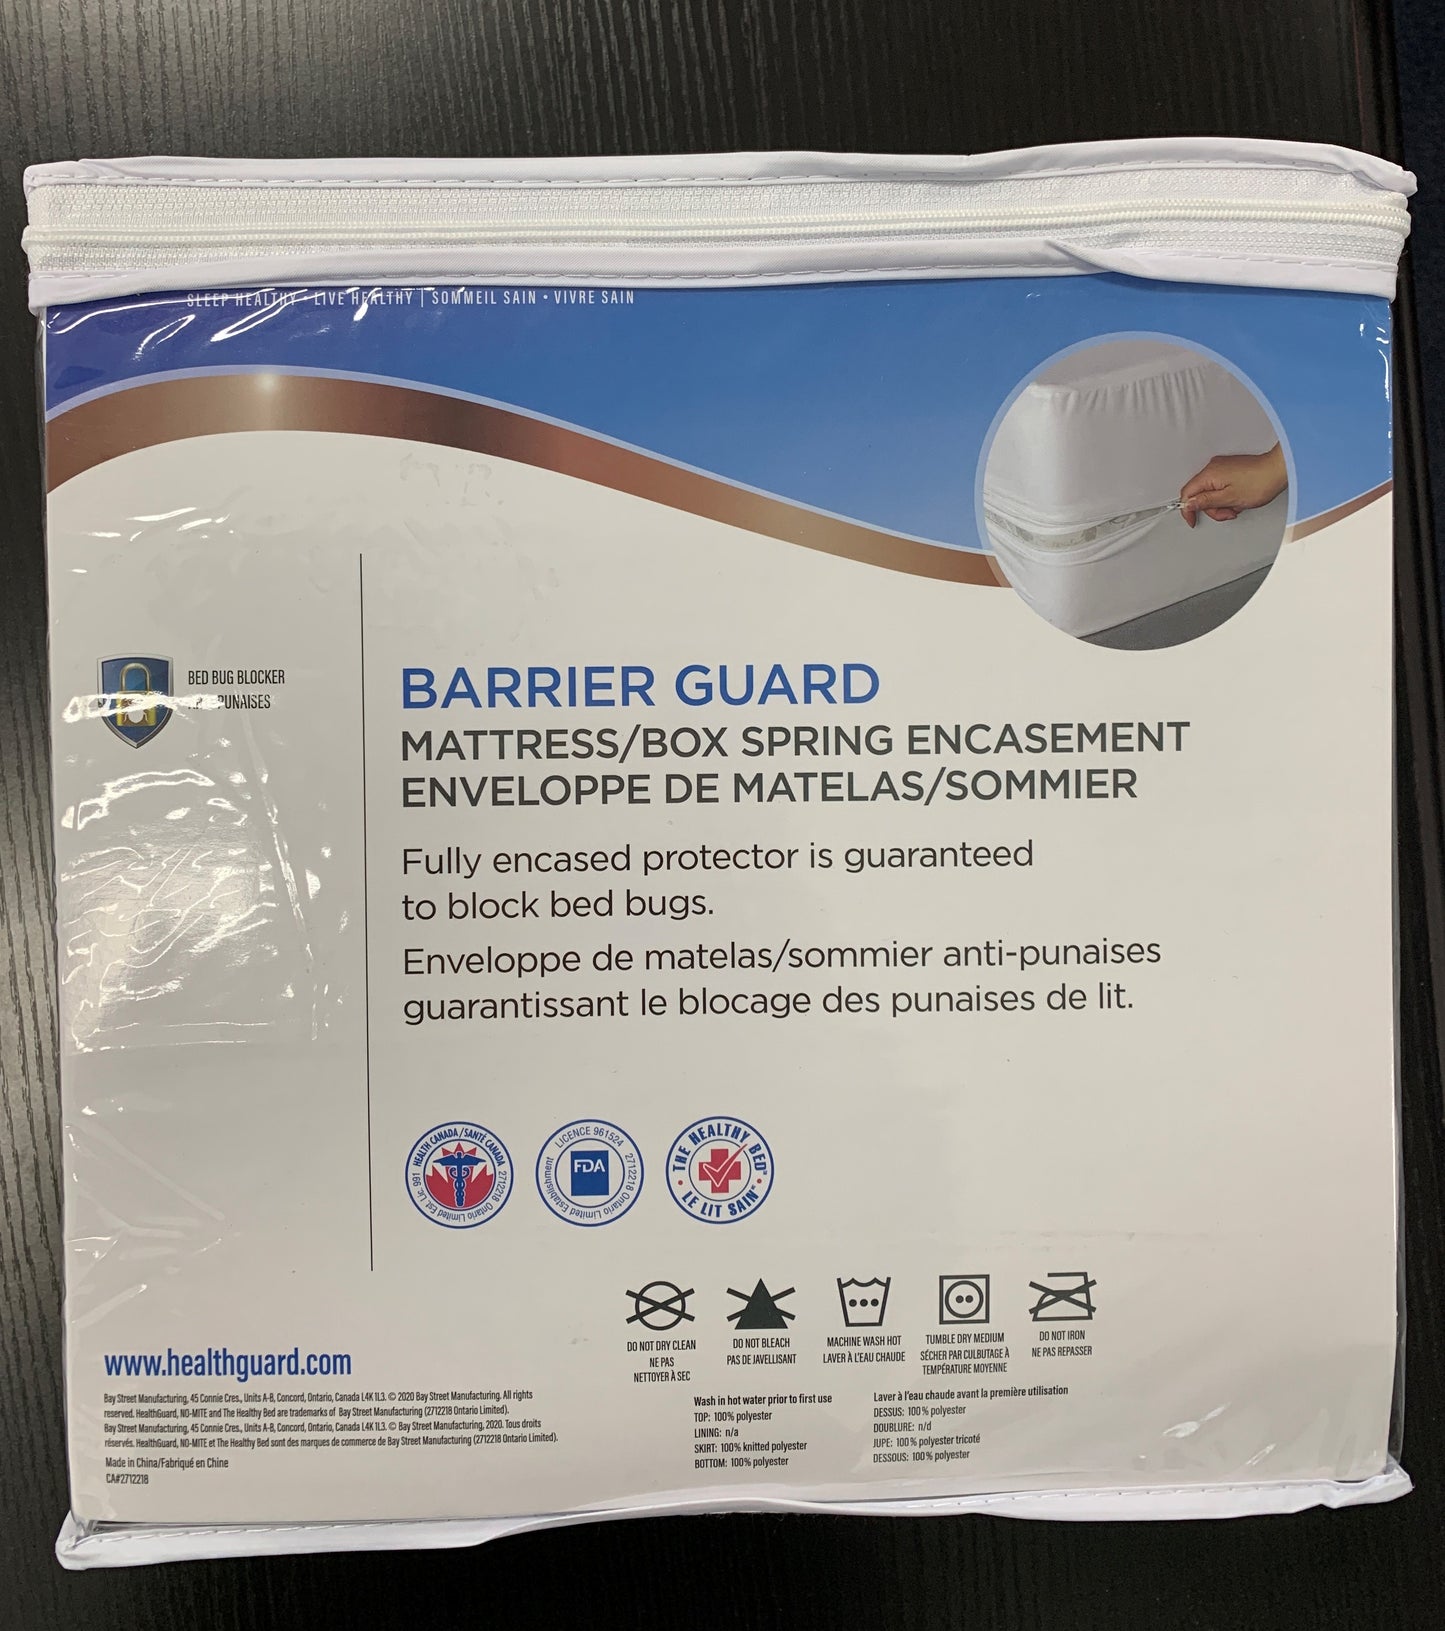 KING SIZE- (HEALTHGUARD BARRIER GUARD)- BED BUG COVER